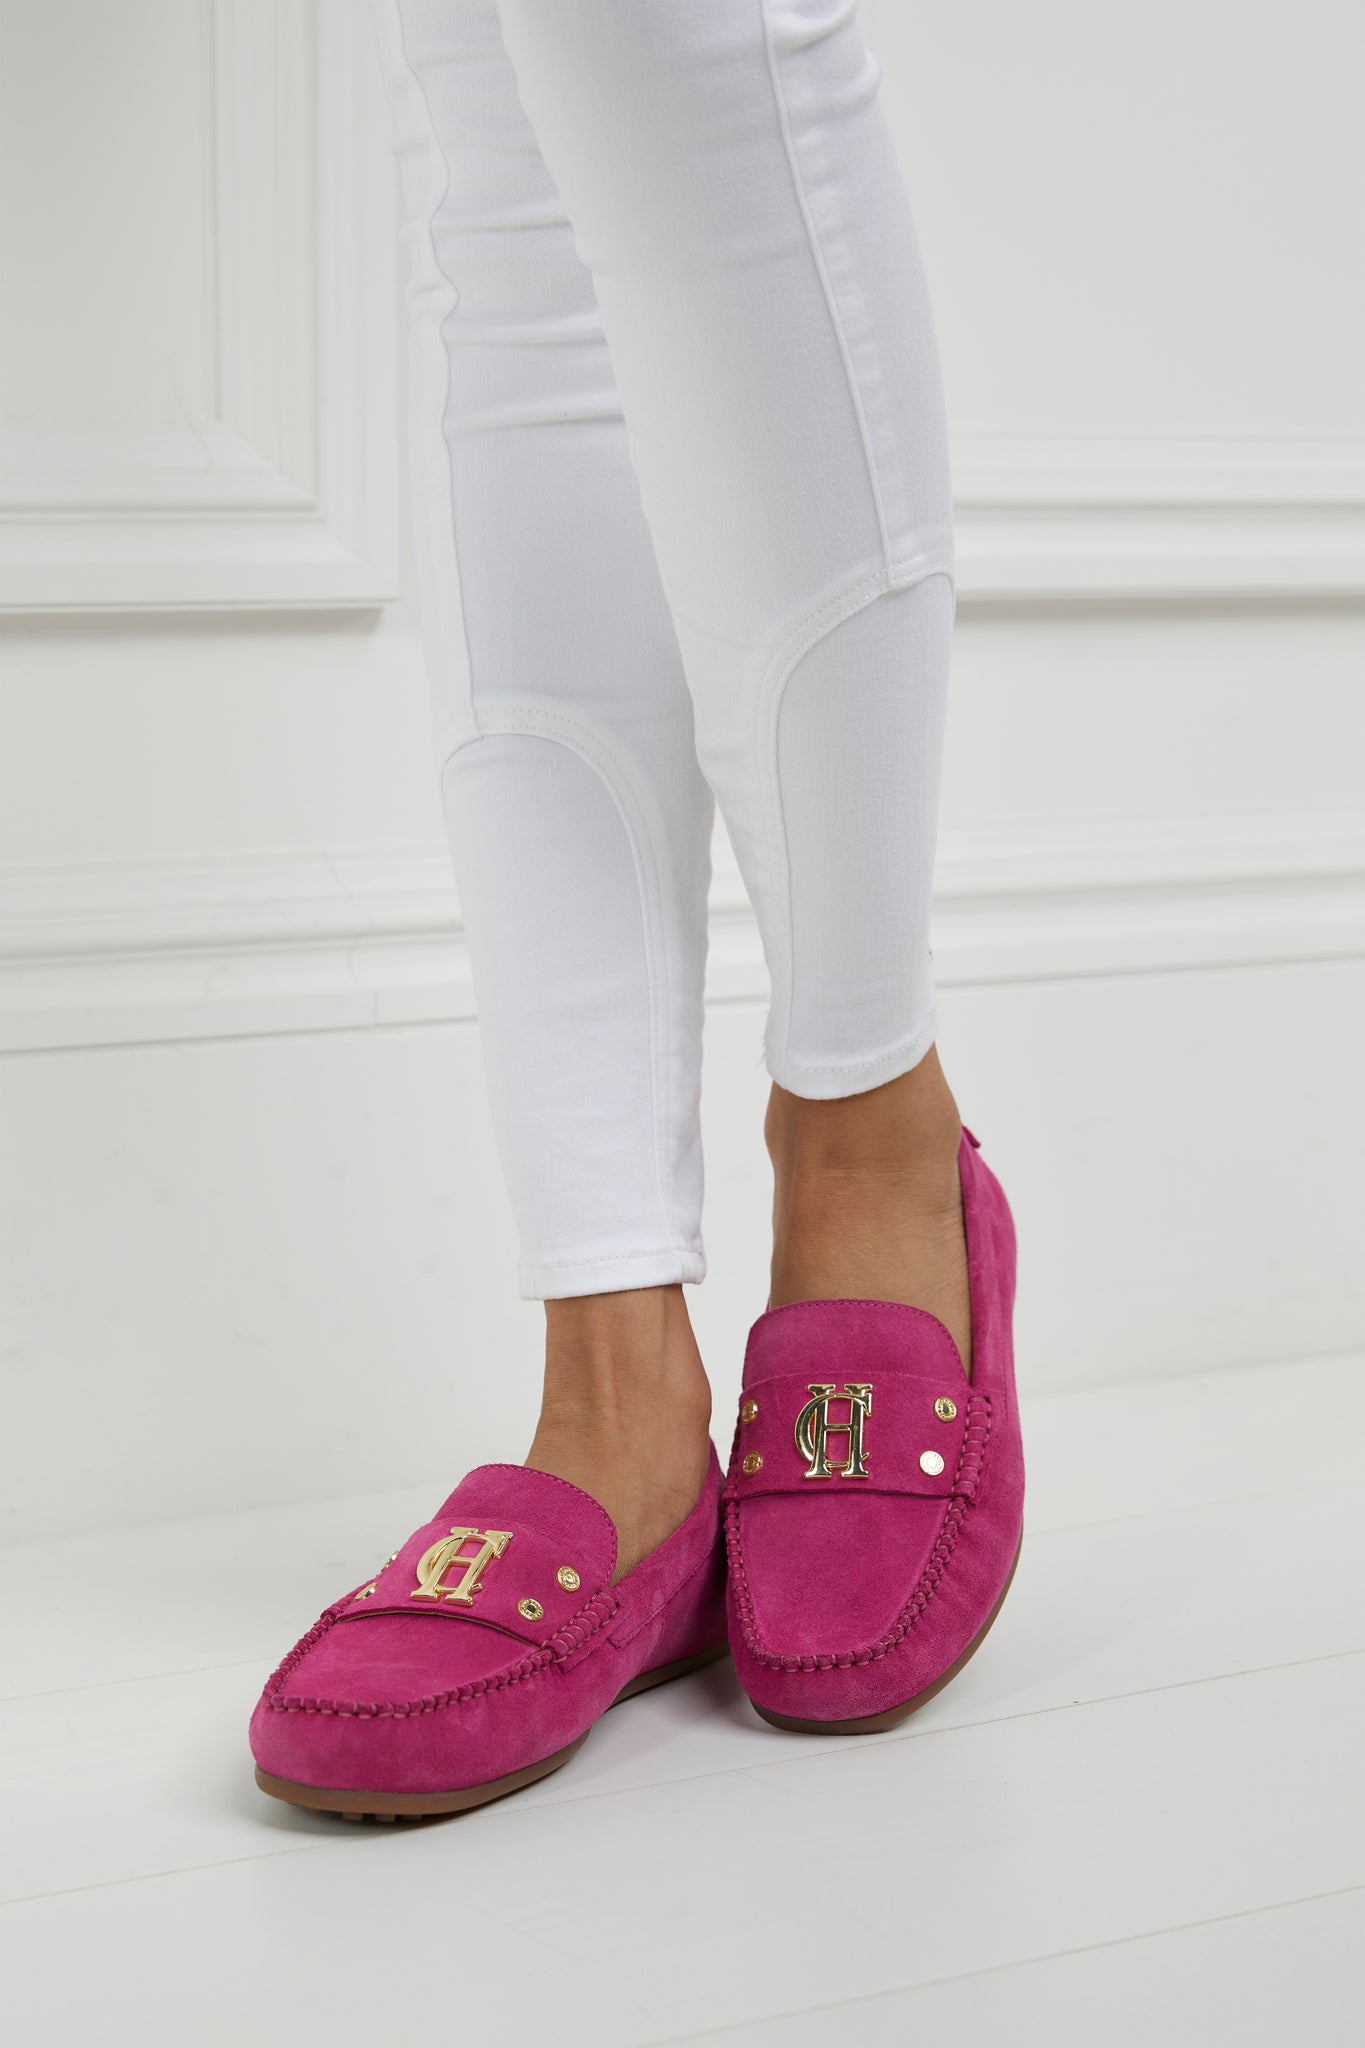 bright pink suede loafers with a leather sole and top stitching details and gold hardware paired with white skinny jeans